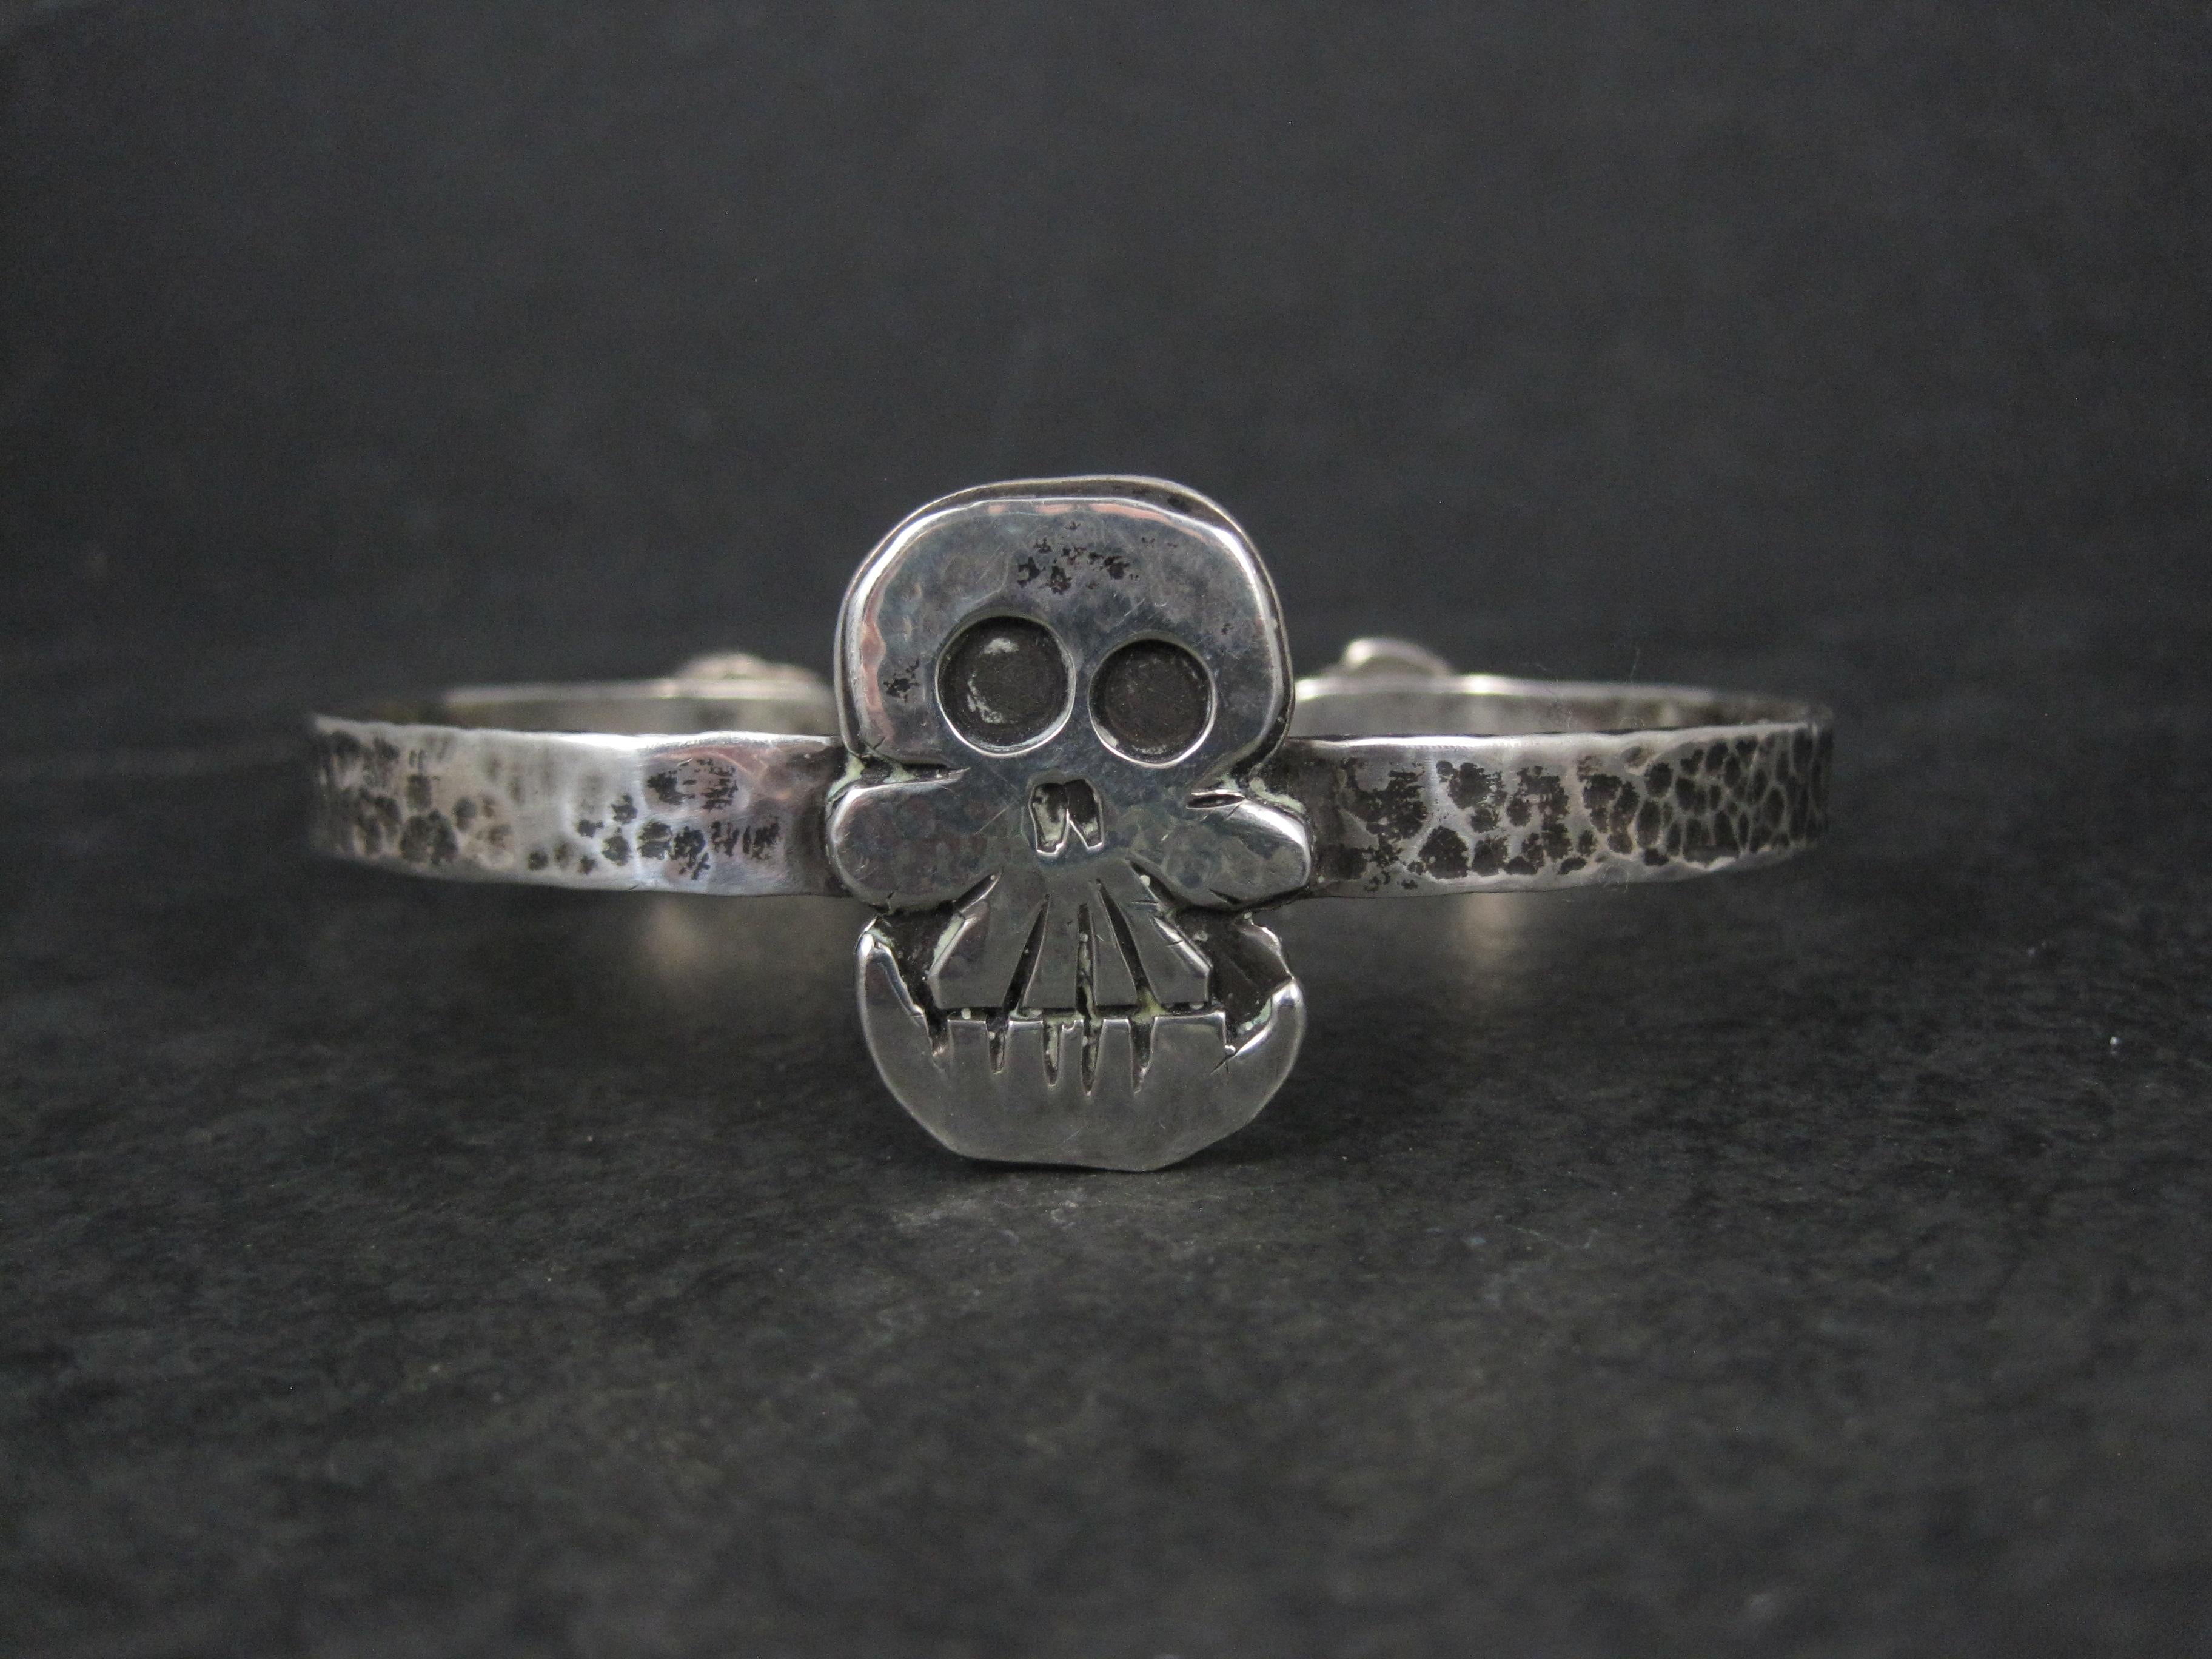 This gorgeous and unusual sterling silver skull cuff bracelet is artisian made.

The face of this bracelet measures 1 inch north to south with a 7mm band.
It has an inner circumference of 7 inches including the 1 inch gap.
Weight: 26.4 grams

Marks: